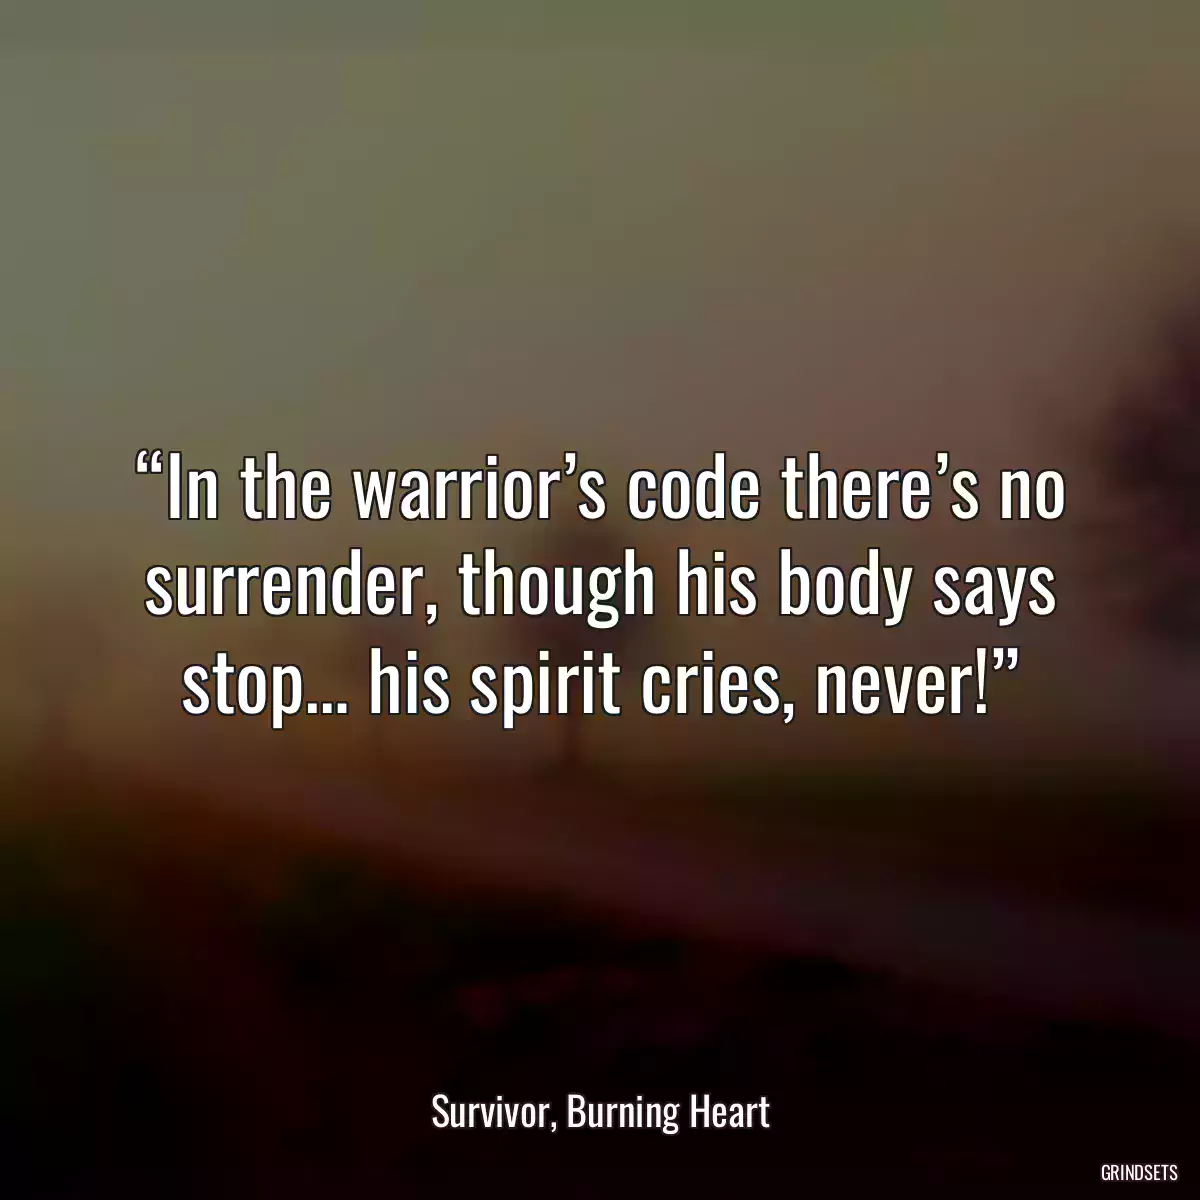 “In the warrior’s code there’s no surrender, though his body says stop… his spirit cries, never!”